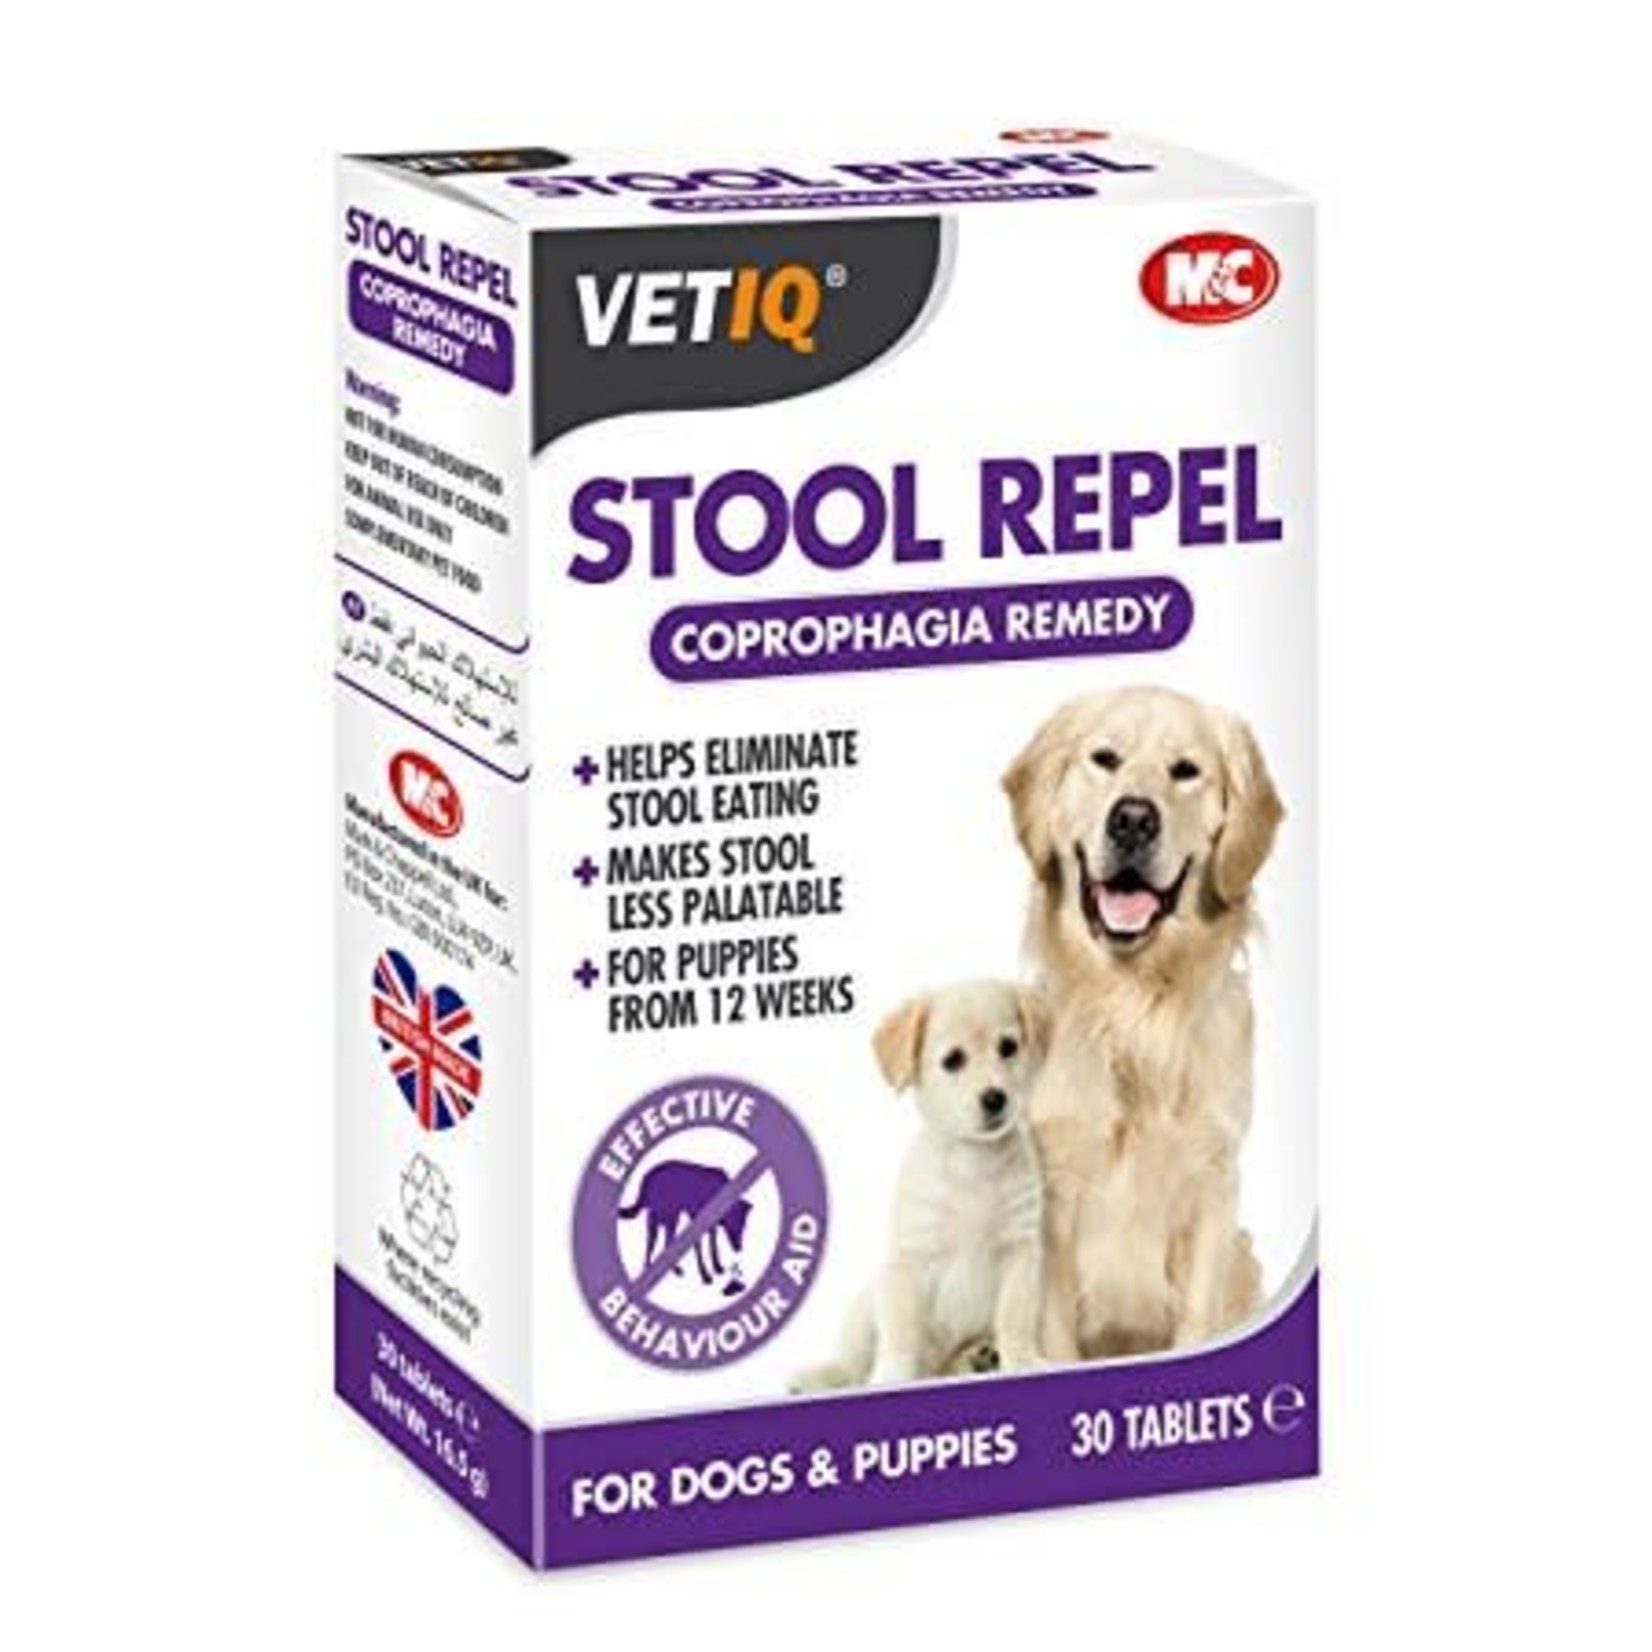 Mark & Chappell VetIQ VetIQ Stool Repel Coprophagia Remedy for Puppies & Dogs, 30 Tablets